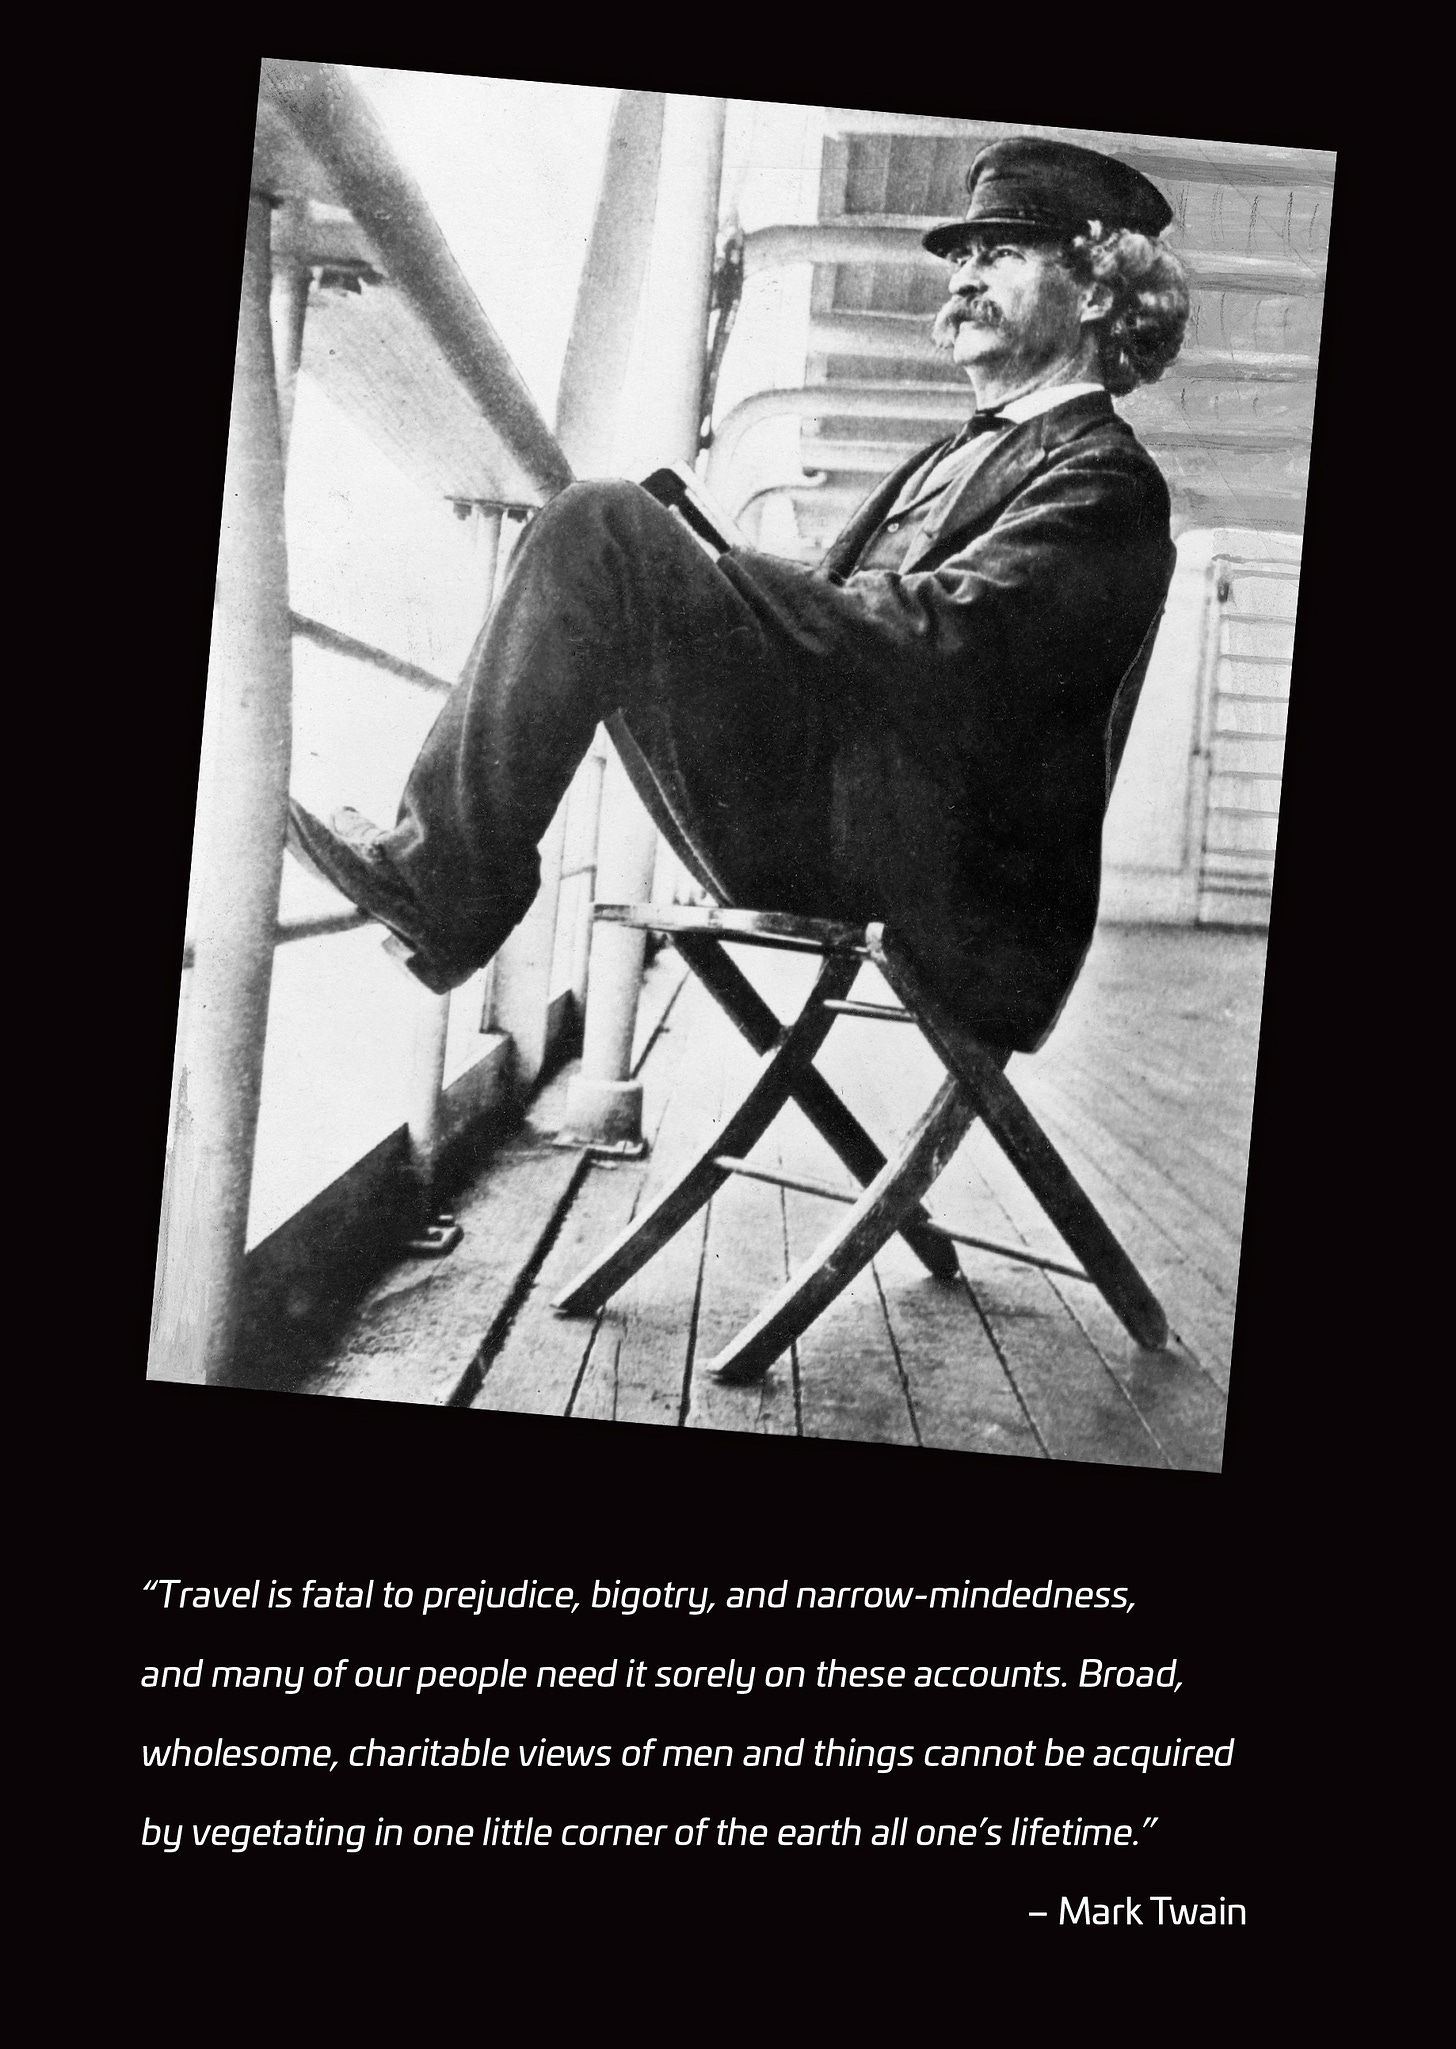 picture of Mark Twain on the deck of a steamship with one of his quotes in the caption